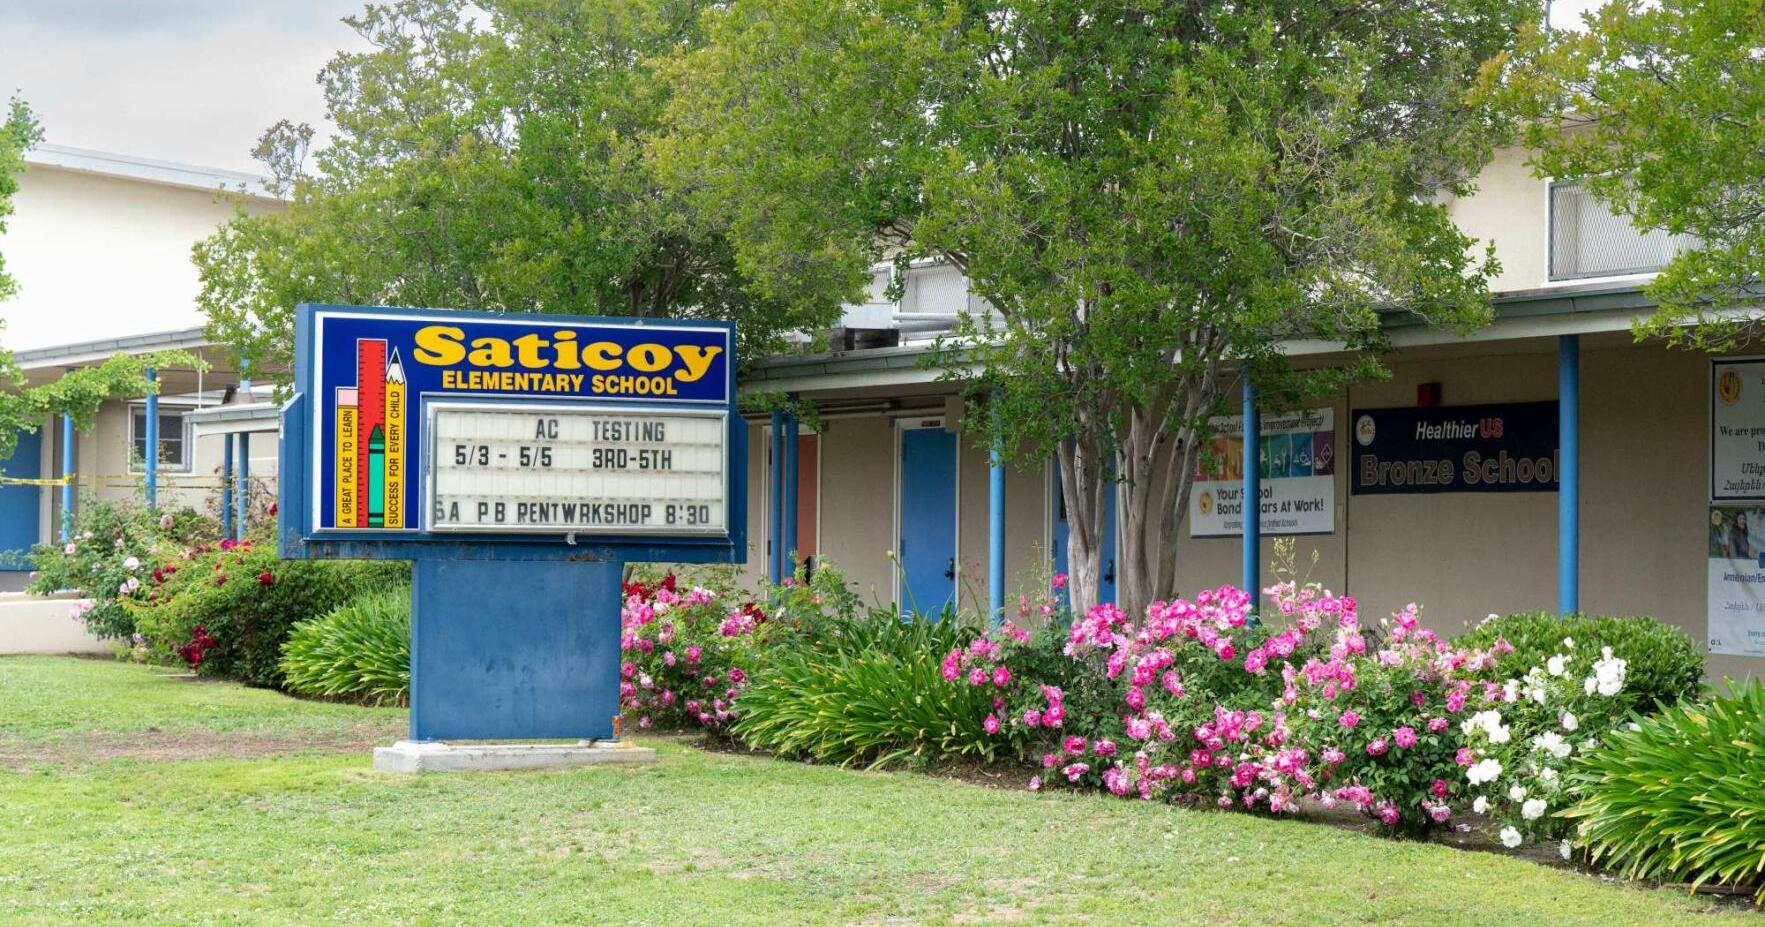 Flag burned at LA elementary school where some parents oppose Pride event